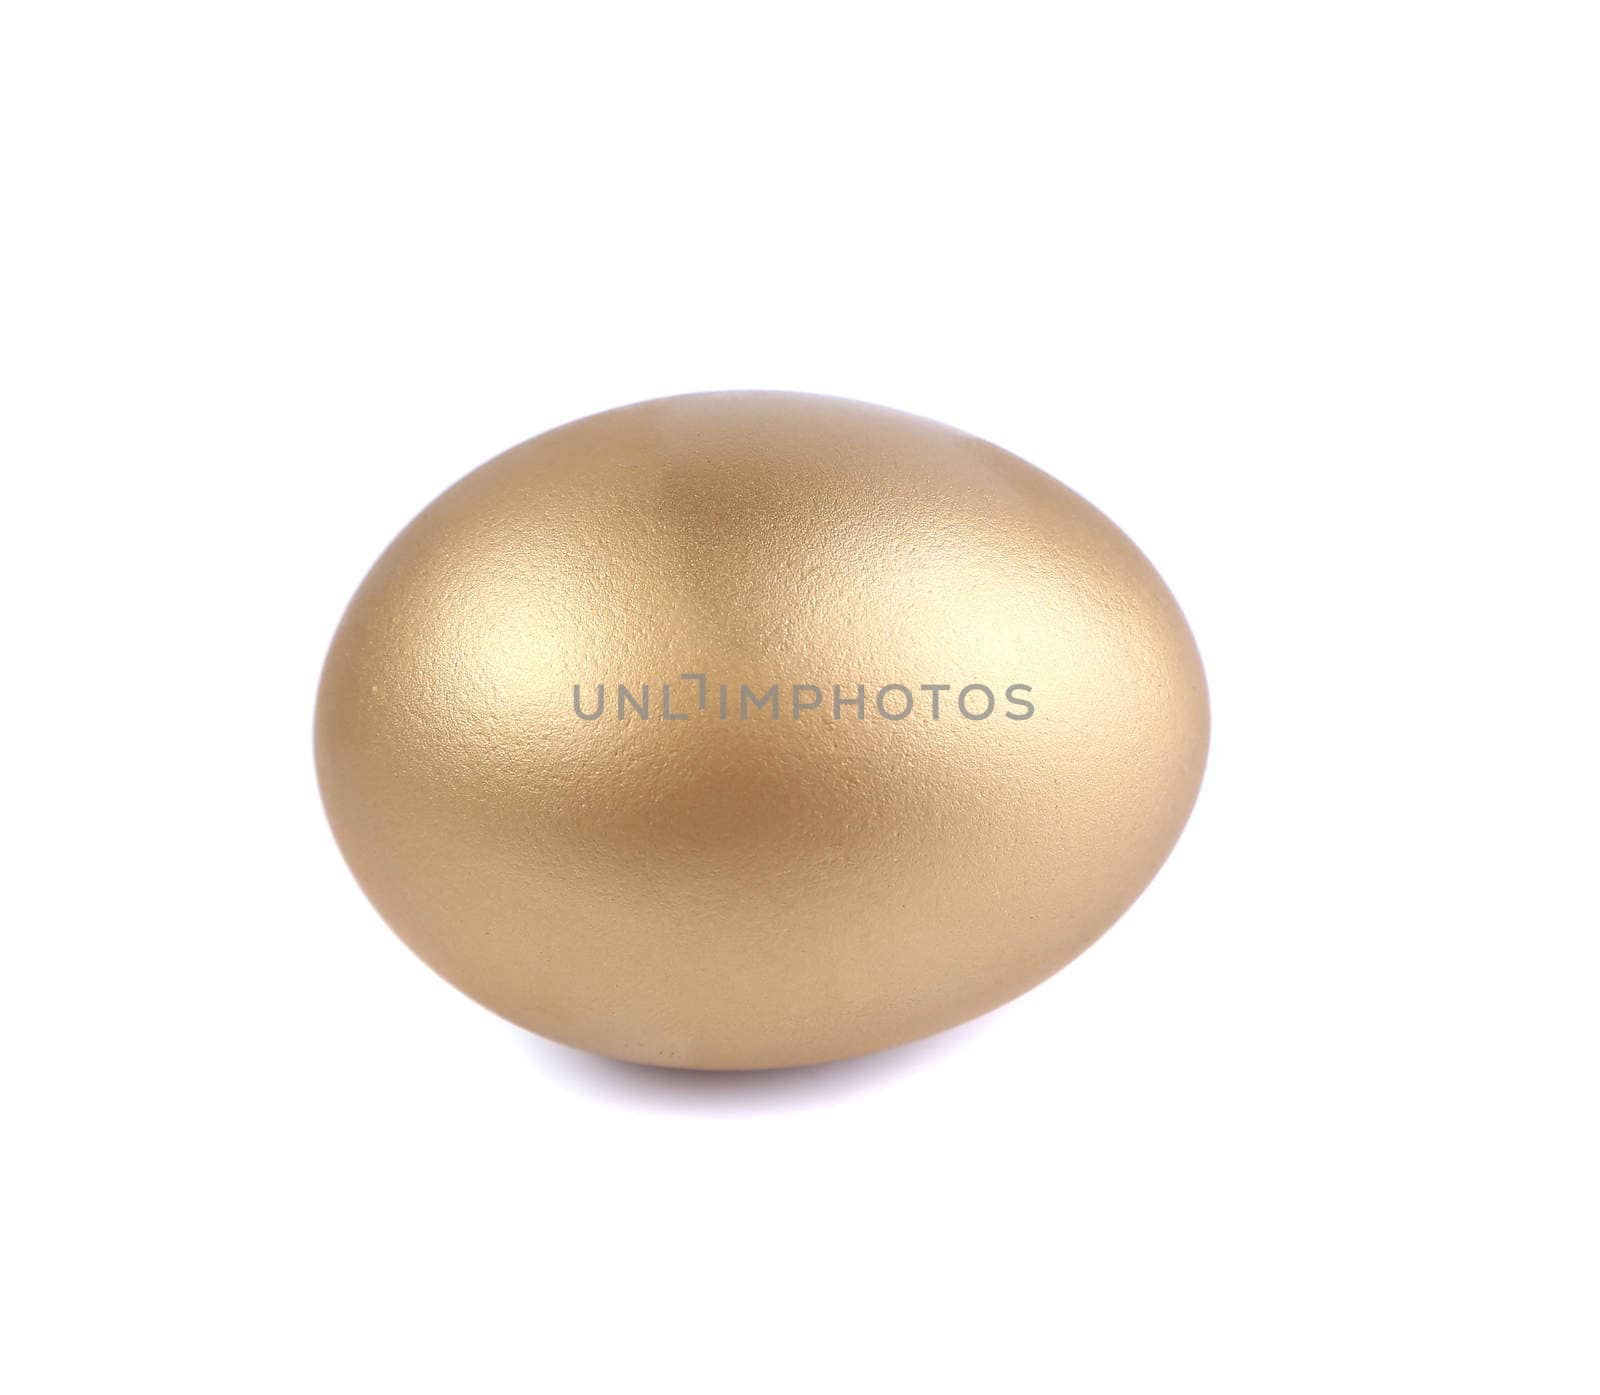 Golden egg, a symbol of making money and successful investment, standing on white background with soft shadow